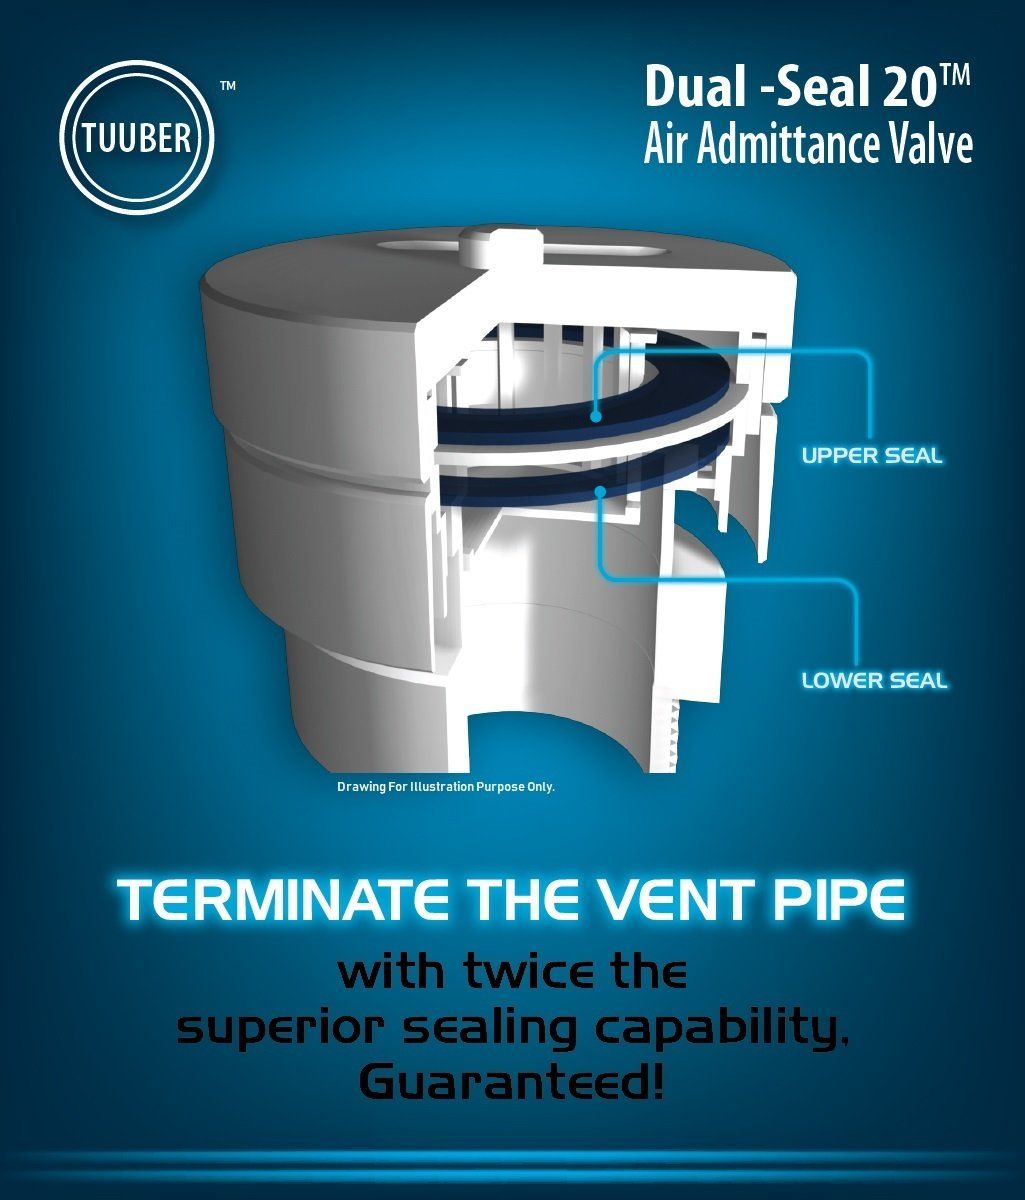 Tuuber Air Admittance Valve Features Dual-Seal 20